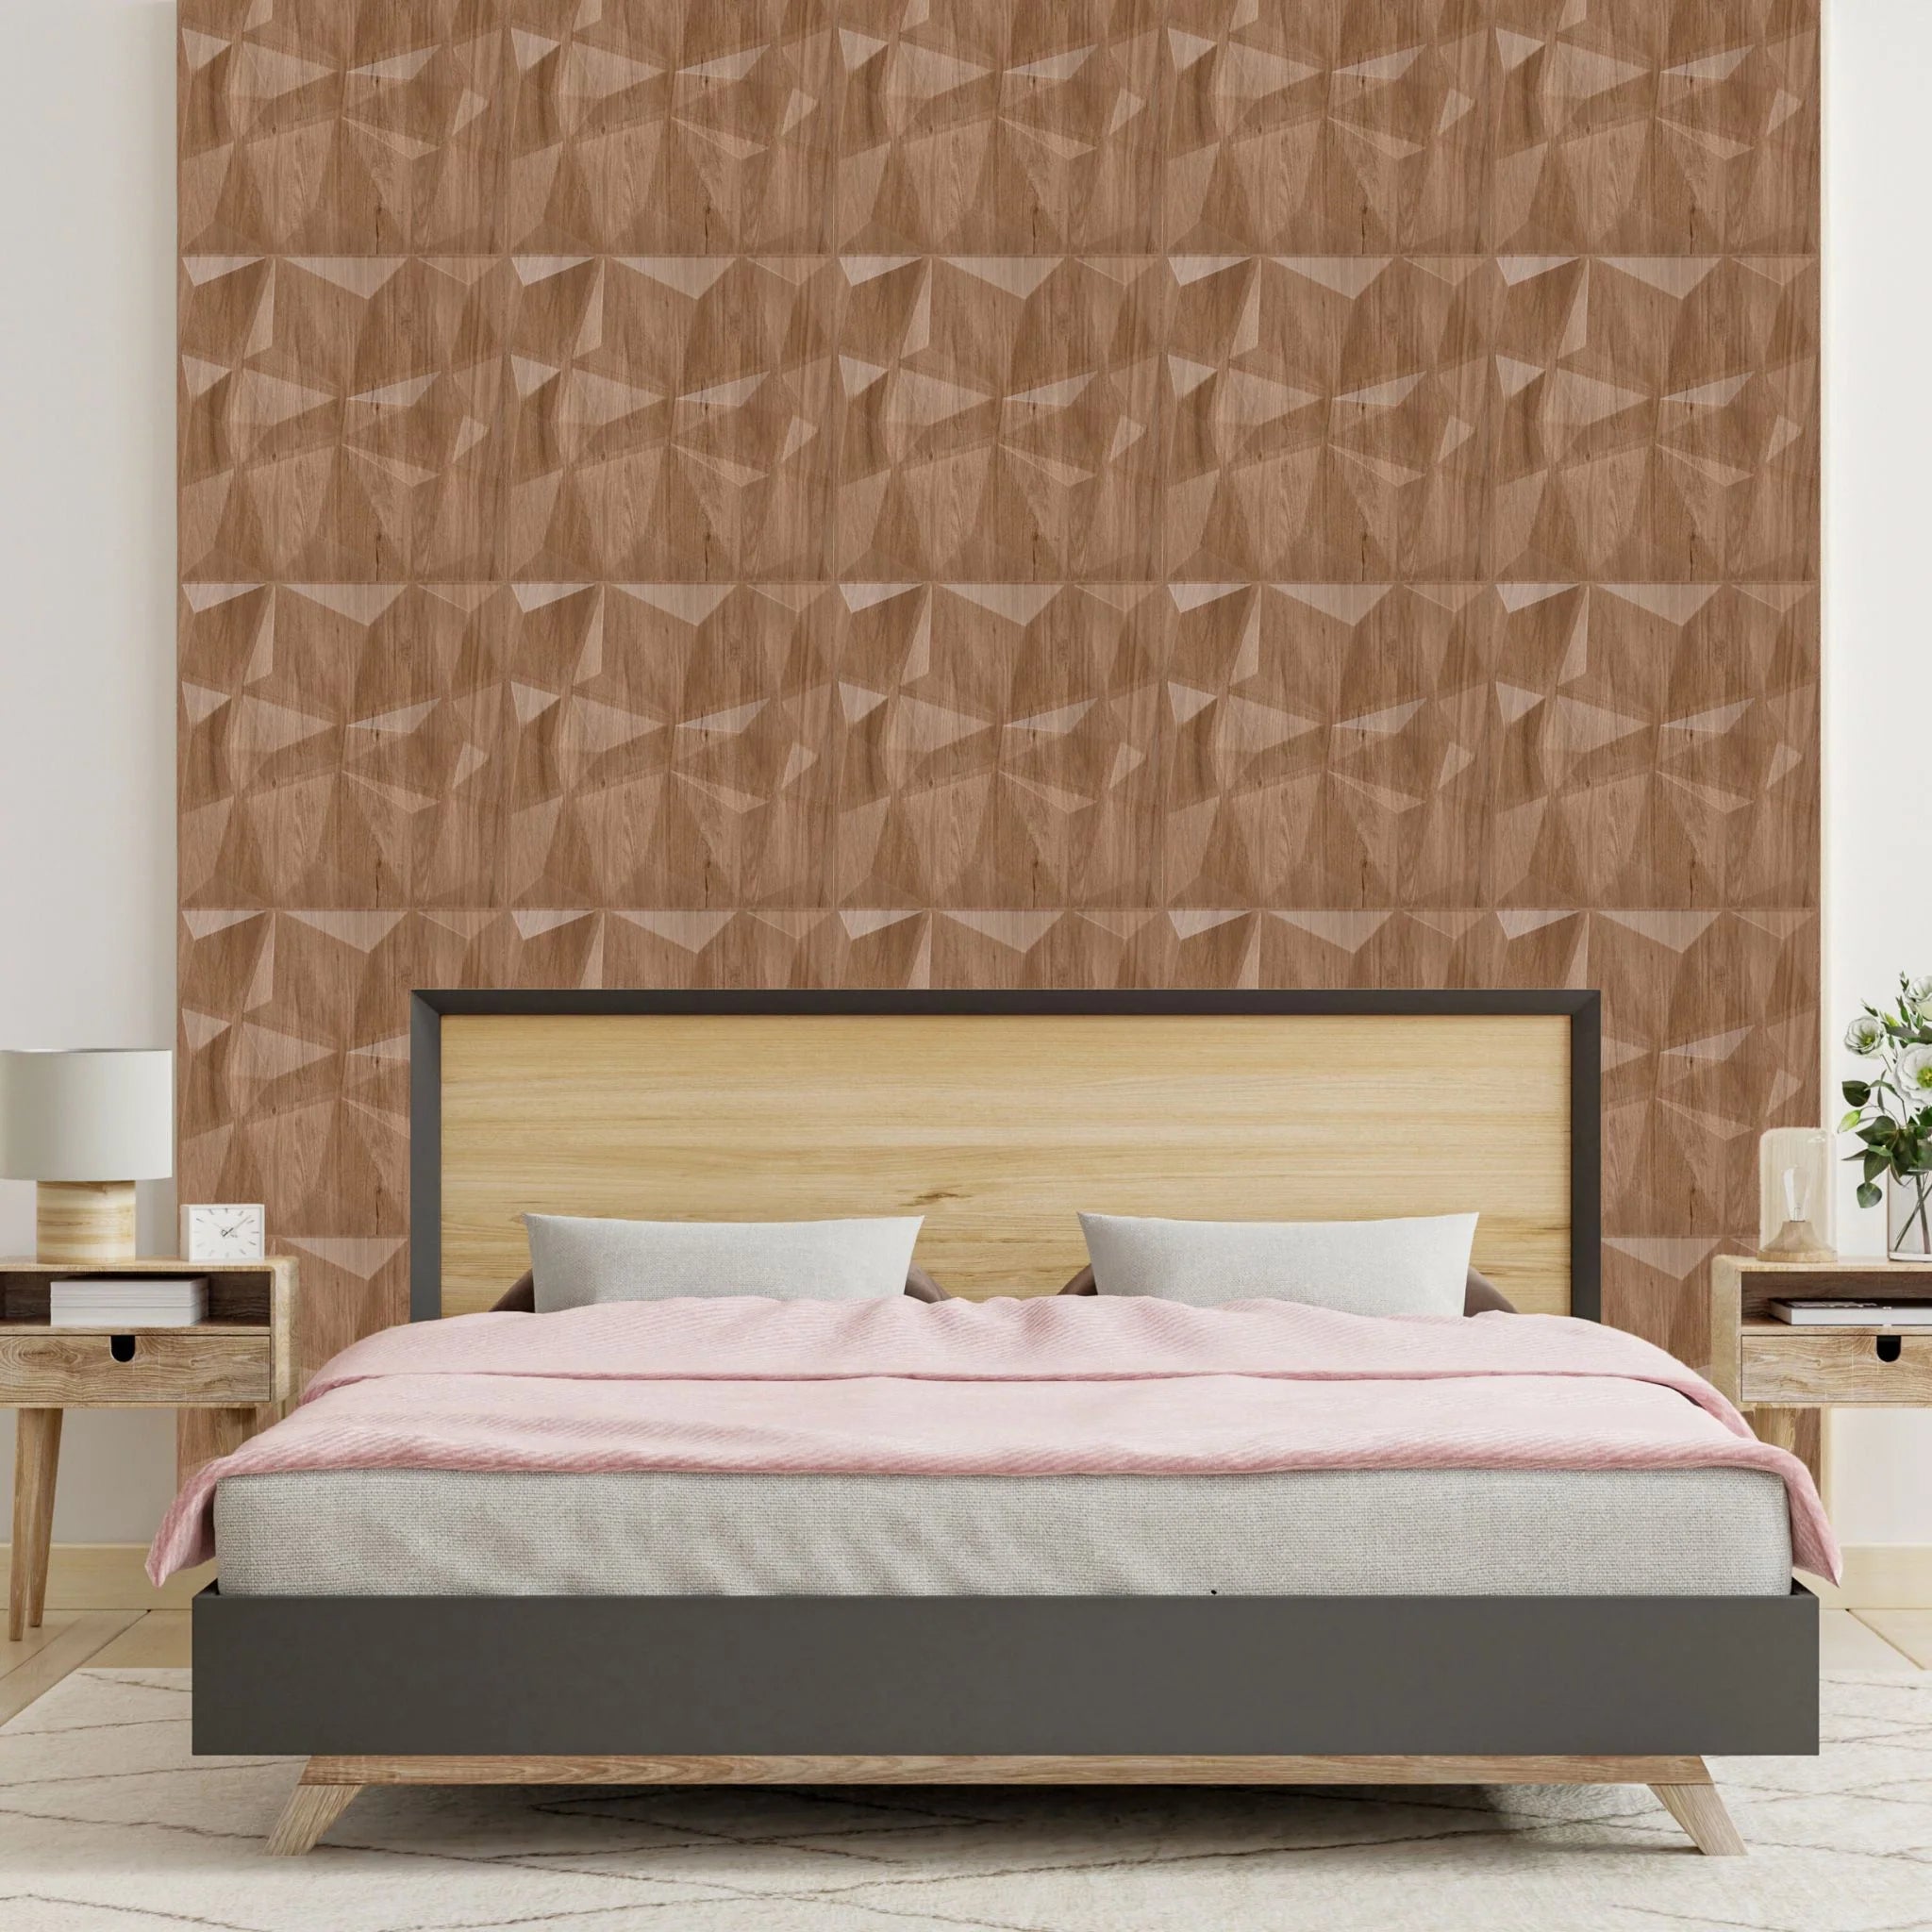 Wooden PVC wall panel with geometric design in stylish Bedroom room